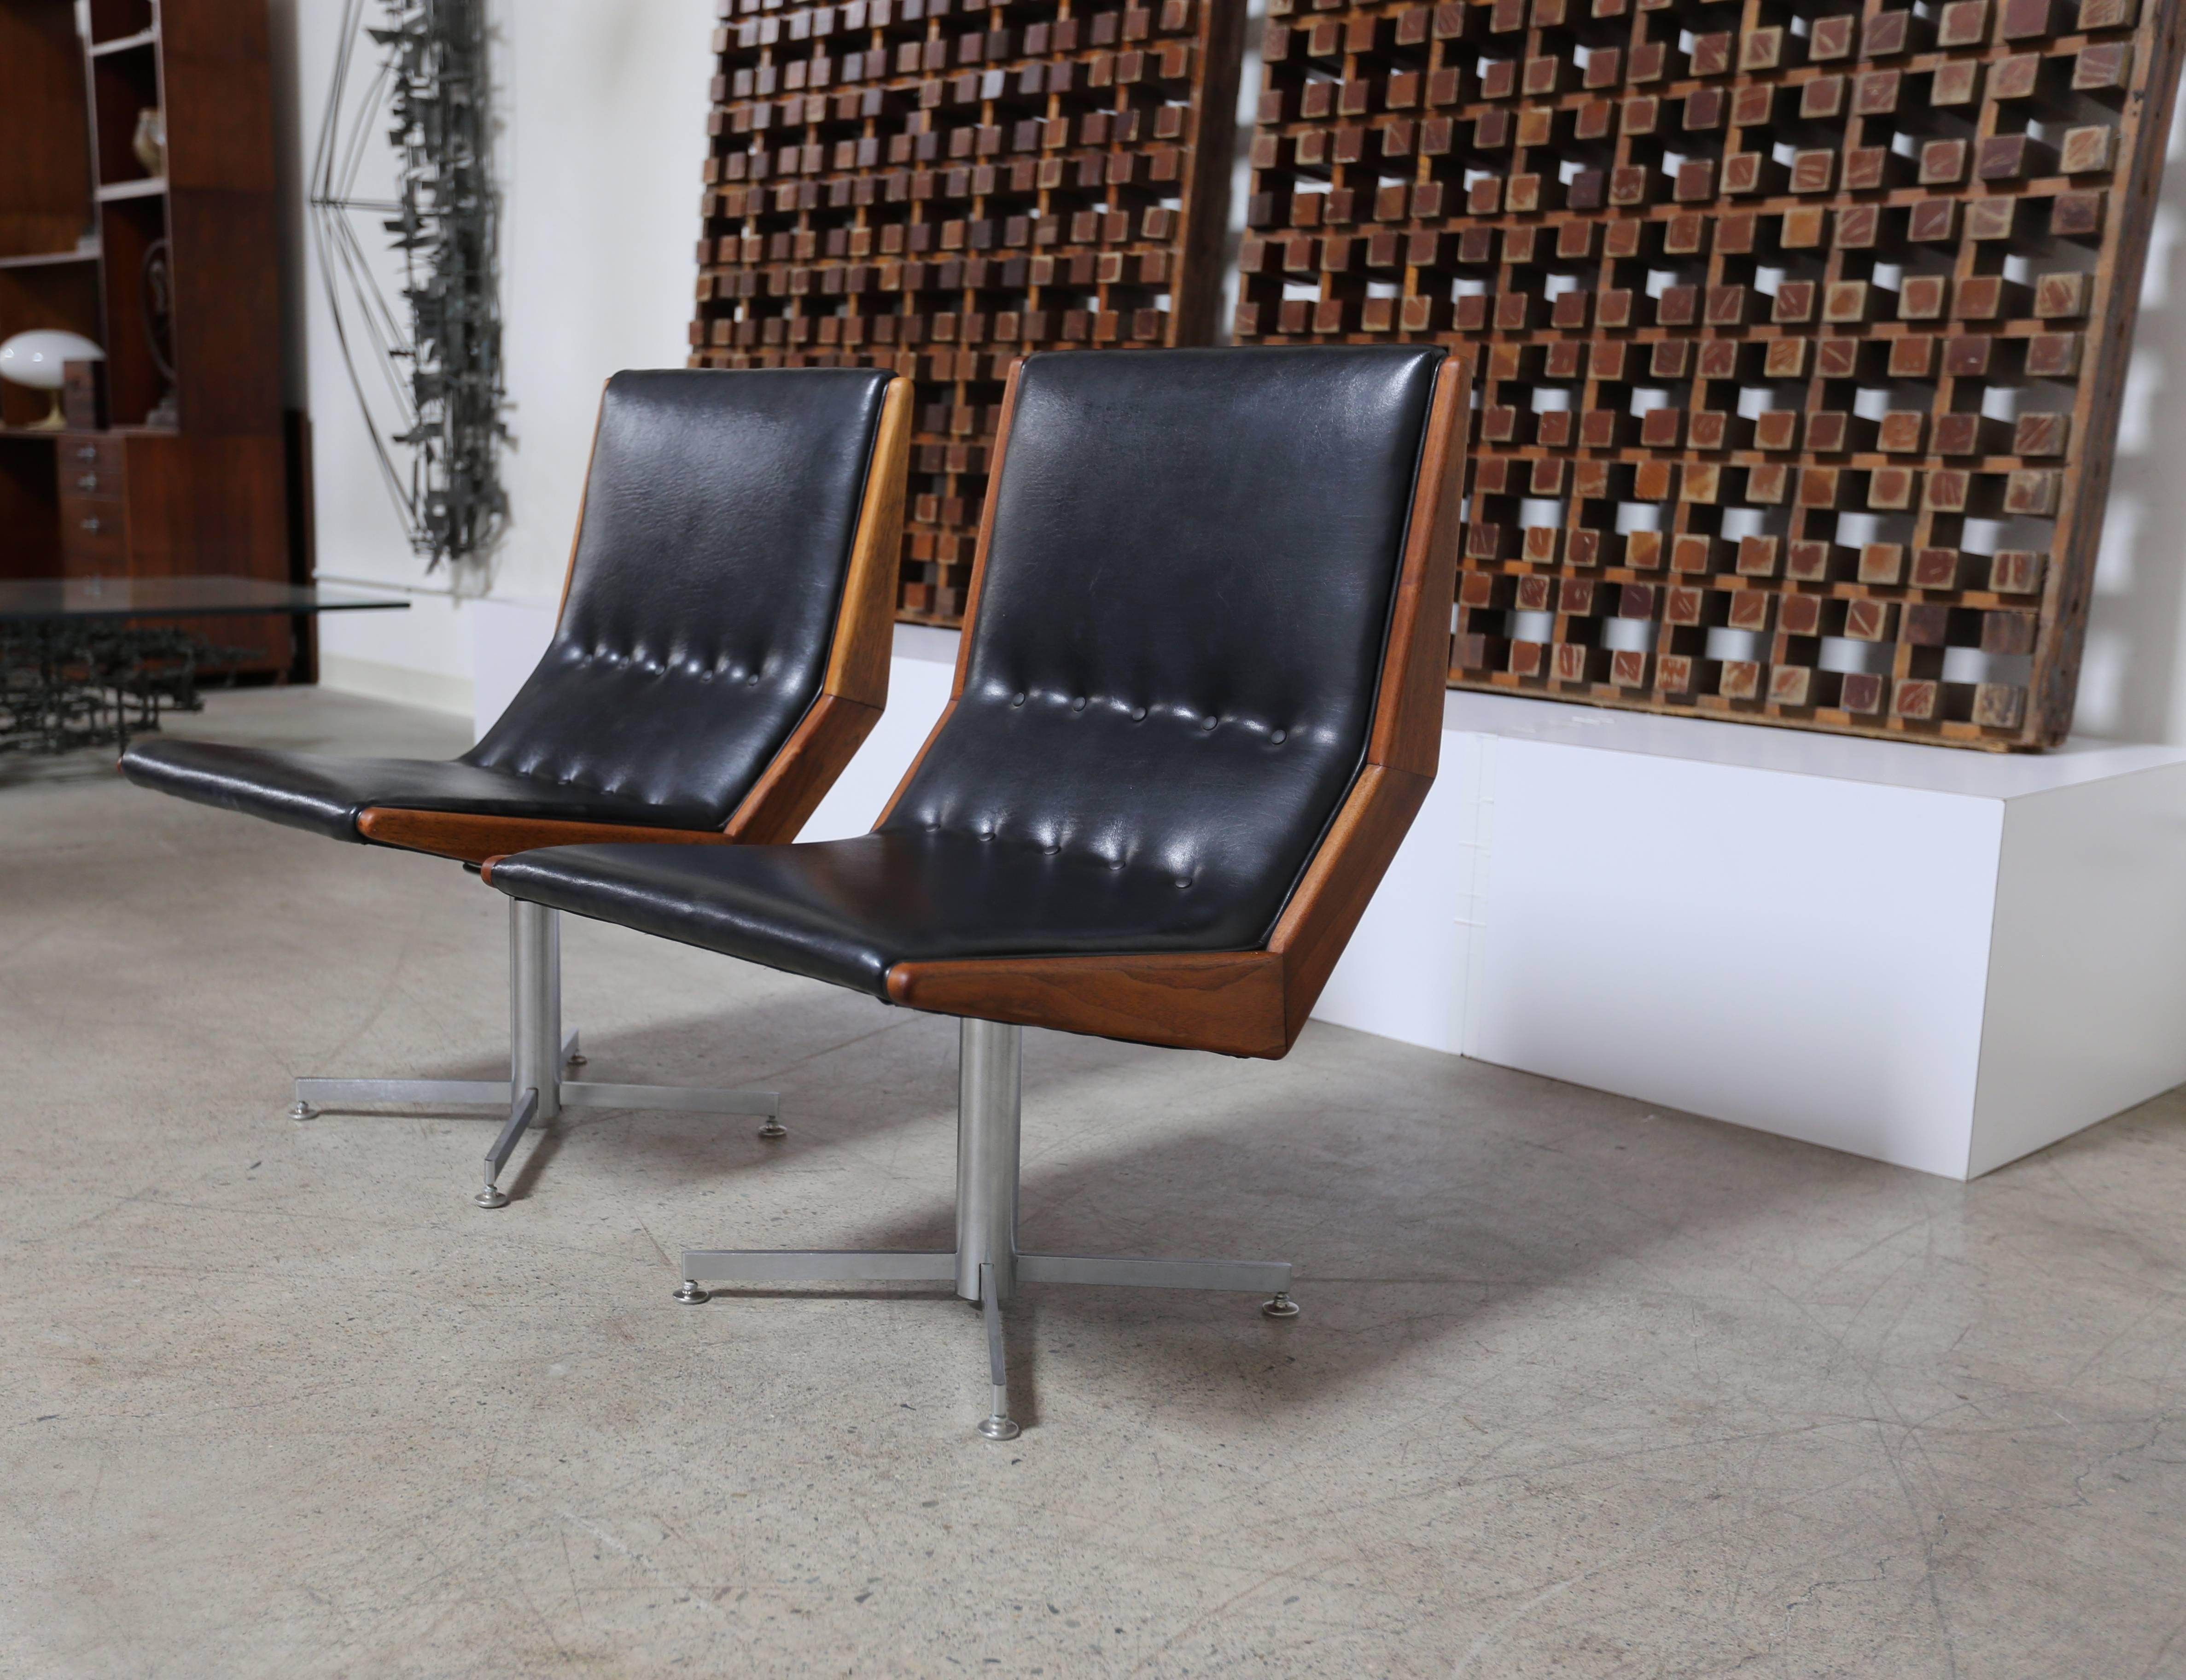 Pair of modernist walnut framed swivel chairs. (Two pairs available).